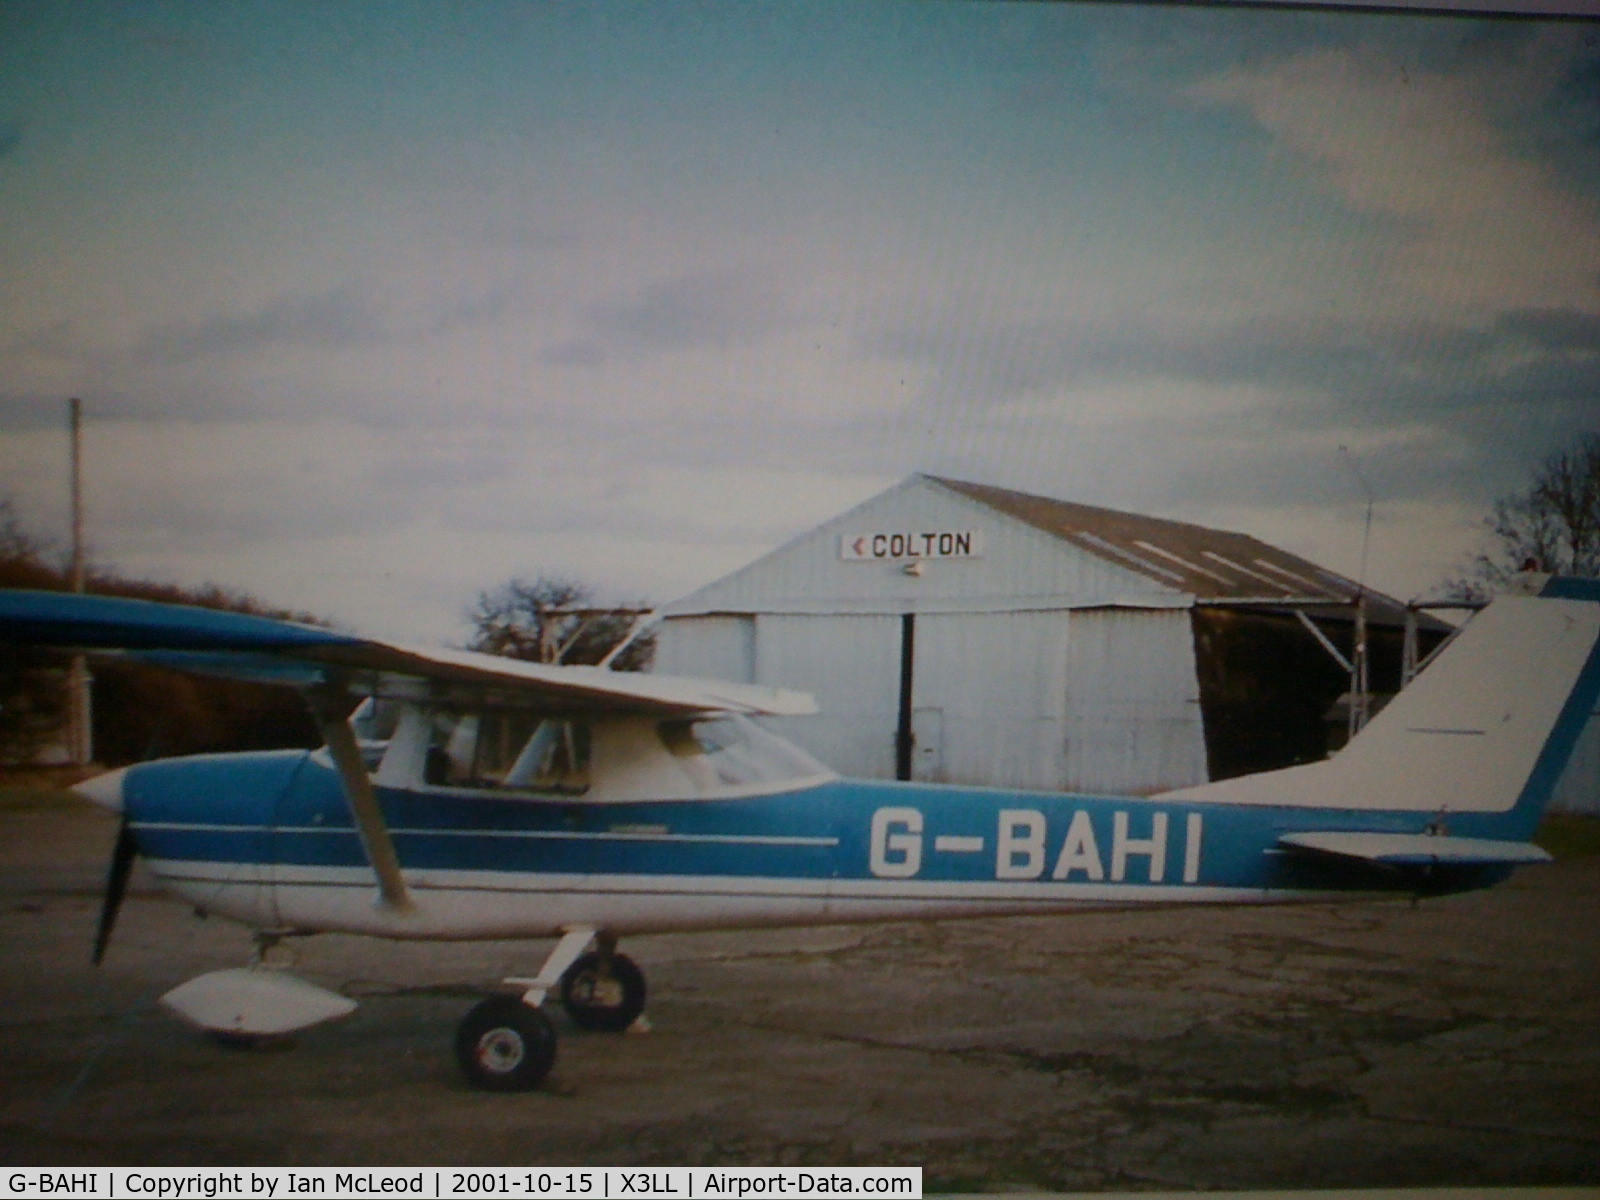 G-BAHI, 1968 Reims F150H C/N 0330, G-BAHI parked at little staughton before the aircraft was damaged by high winds.